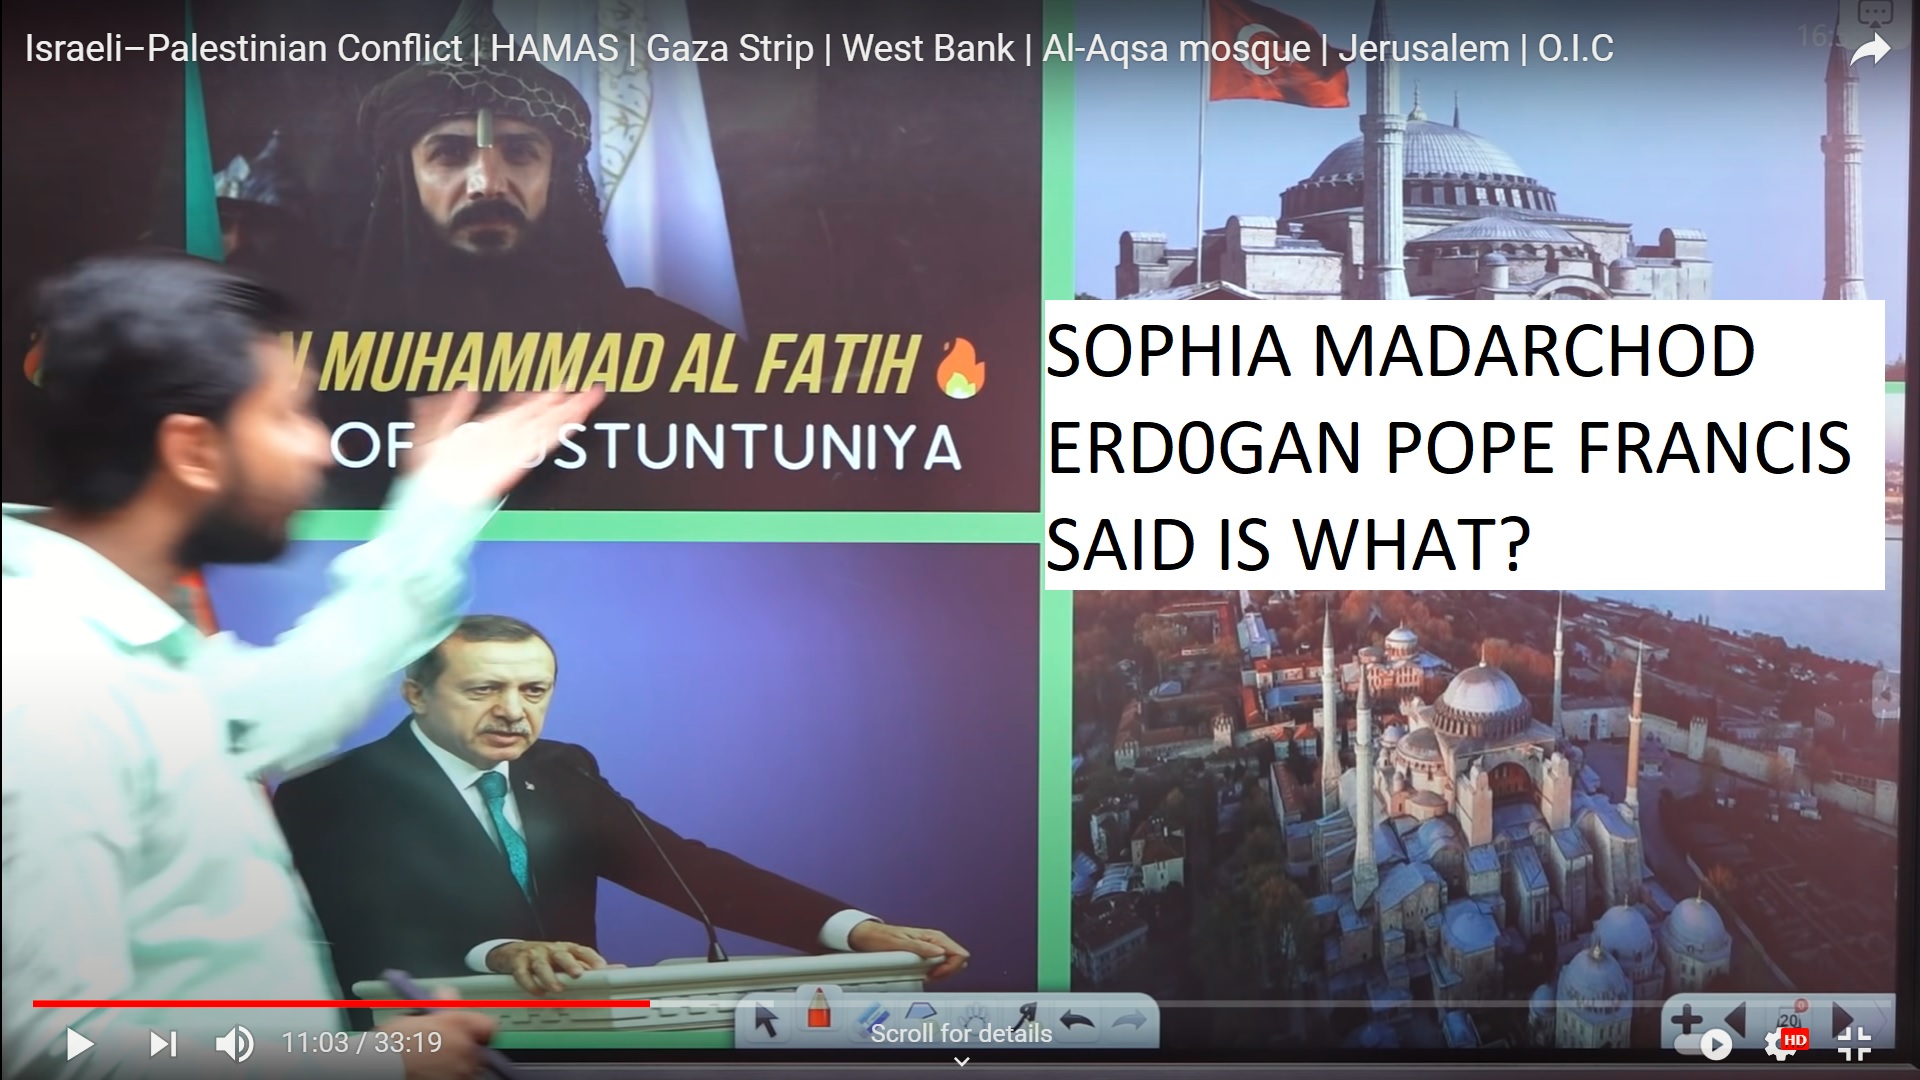 ERDOGAN - SOPHIA POPE FRANCIS - MOSUE CHRUCH - AND TURKY FUCK